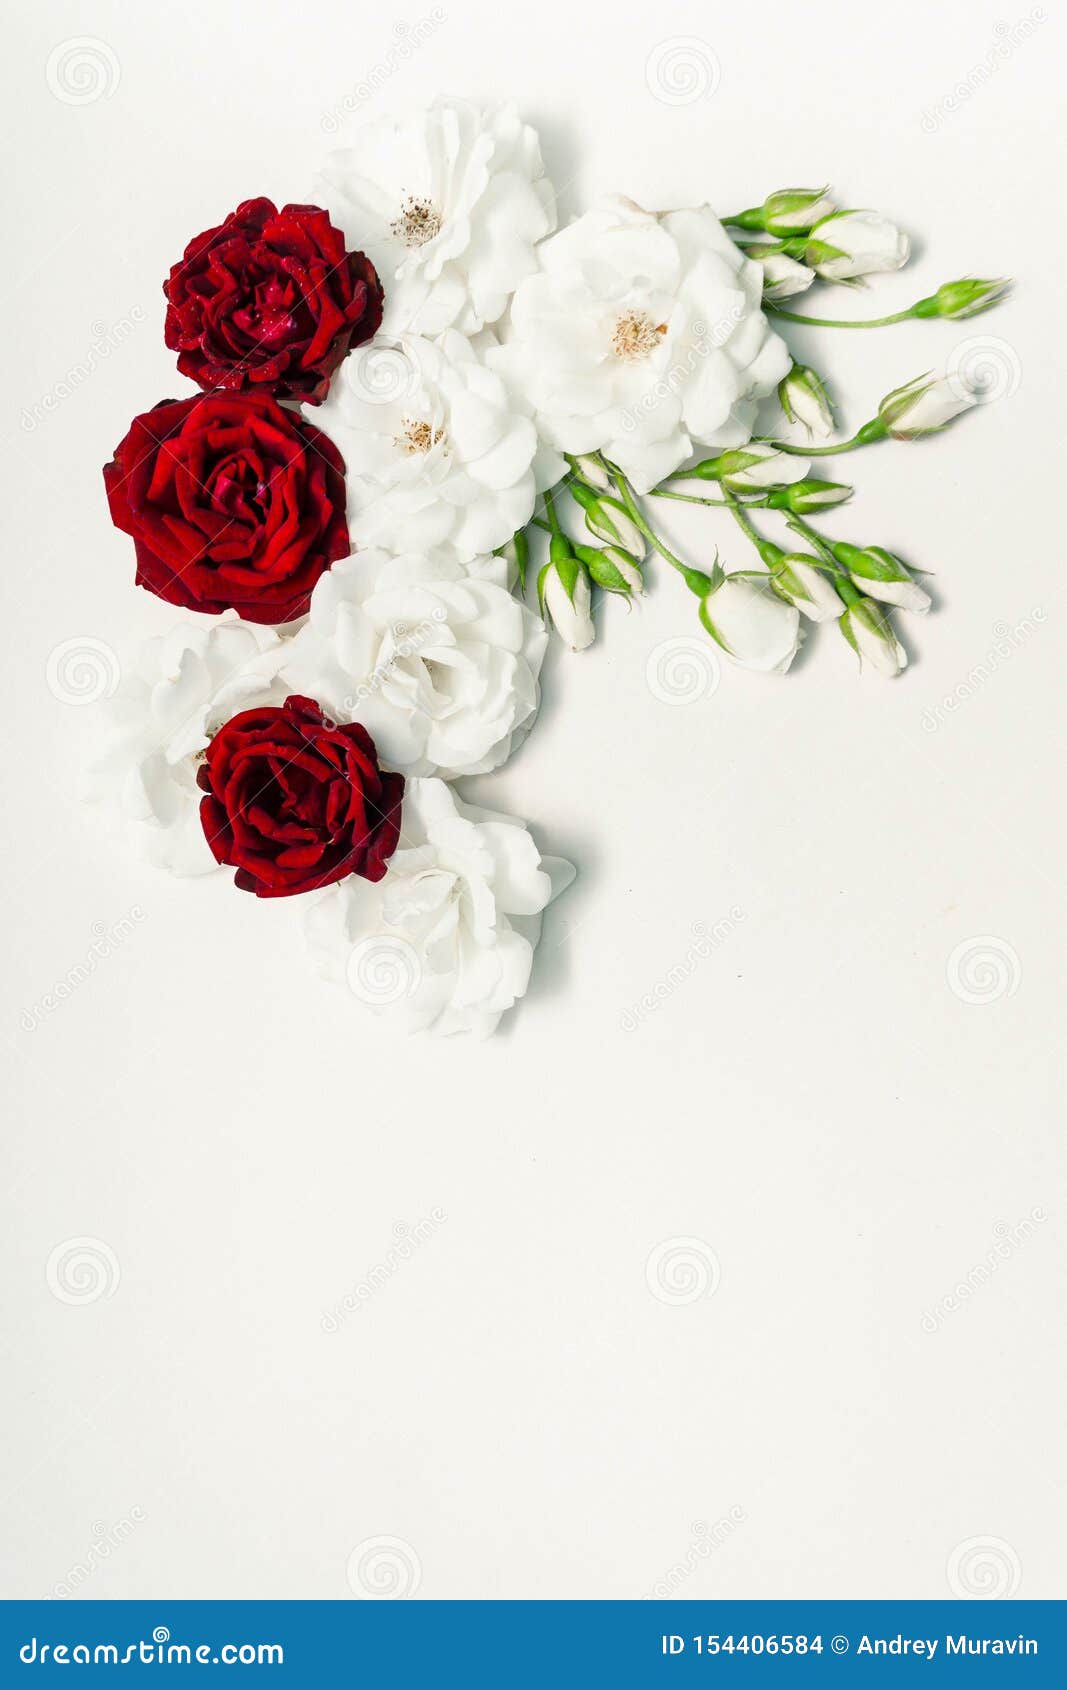 Red and white roses stock photo. Image of flower, holiday - 154406584